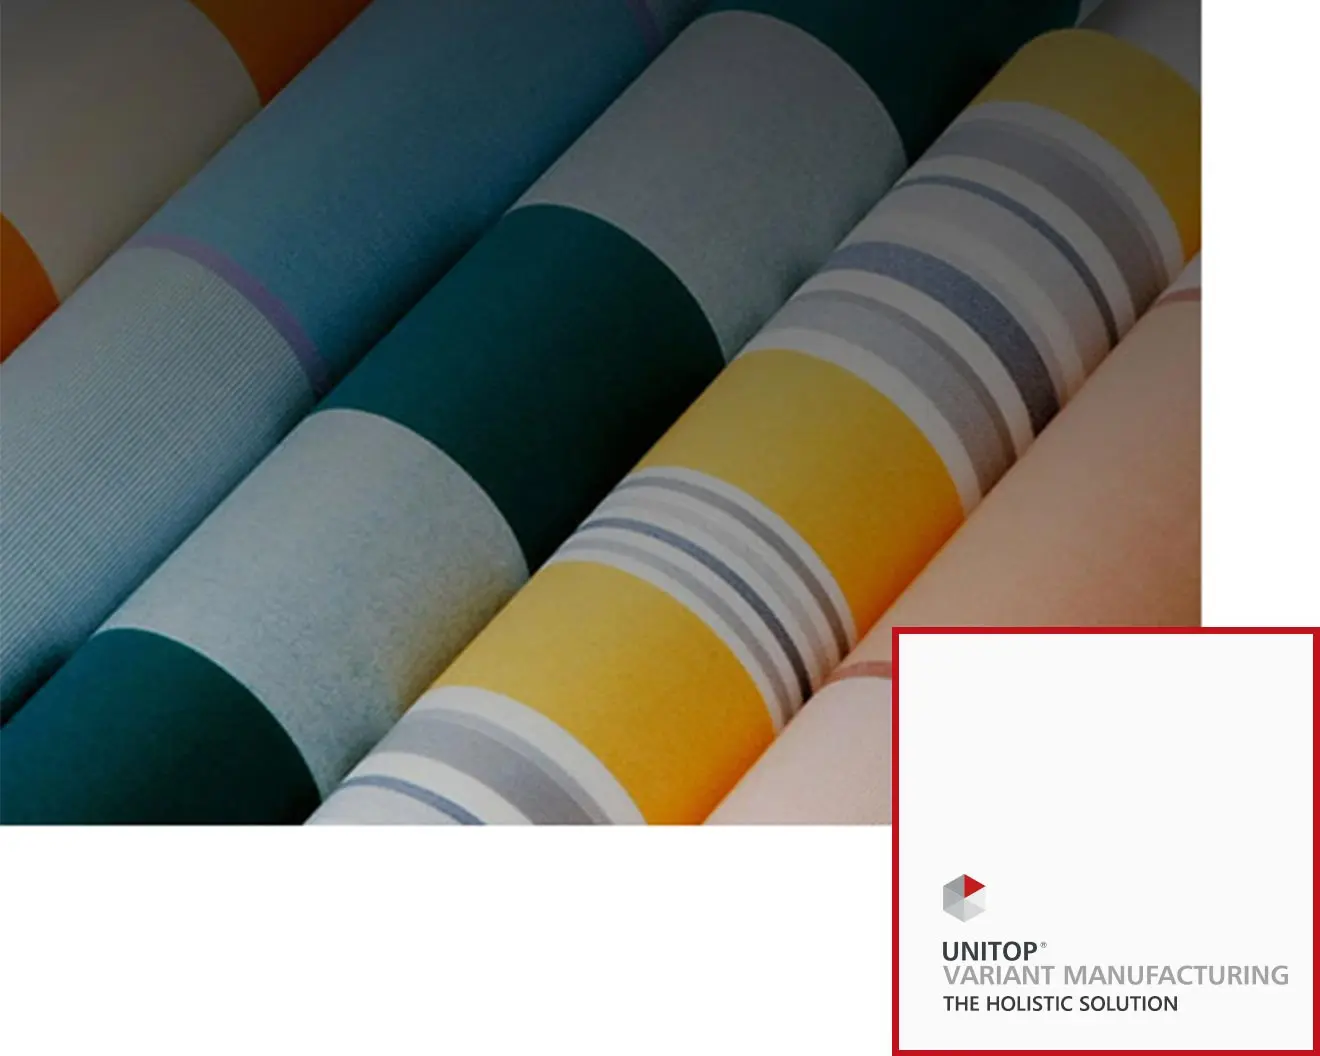 Rolled fabrics with various colors and patterns, unitop variant manufacturing logo at the bottom right